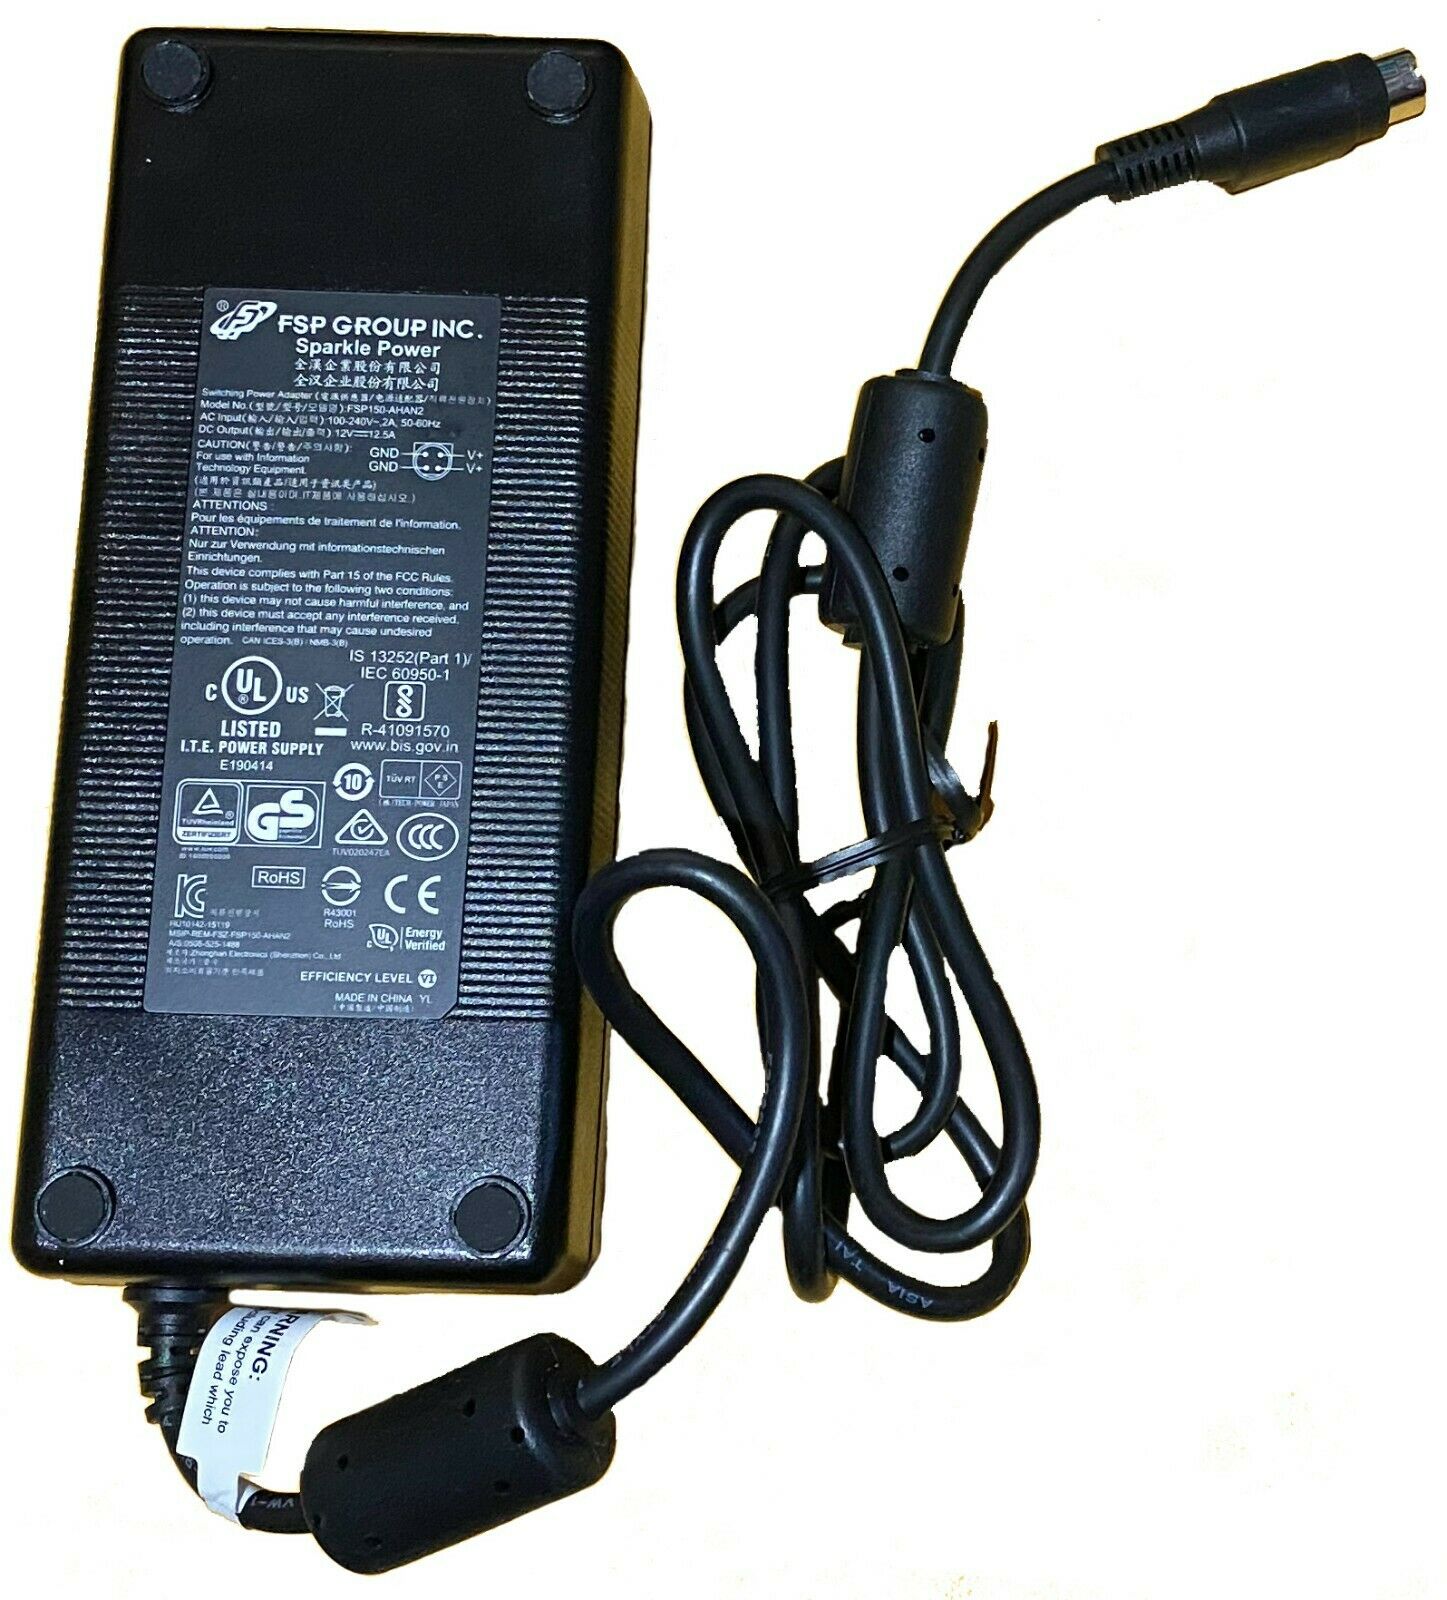 *NEW* FSP GROUP 150 Watts 12V 12.5A 100~240V 4-Pin C14 AC to DC Power Adapter Country/Region of Manufacture